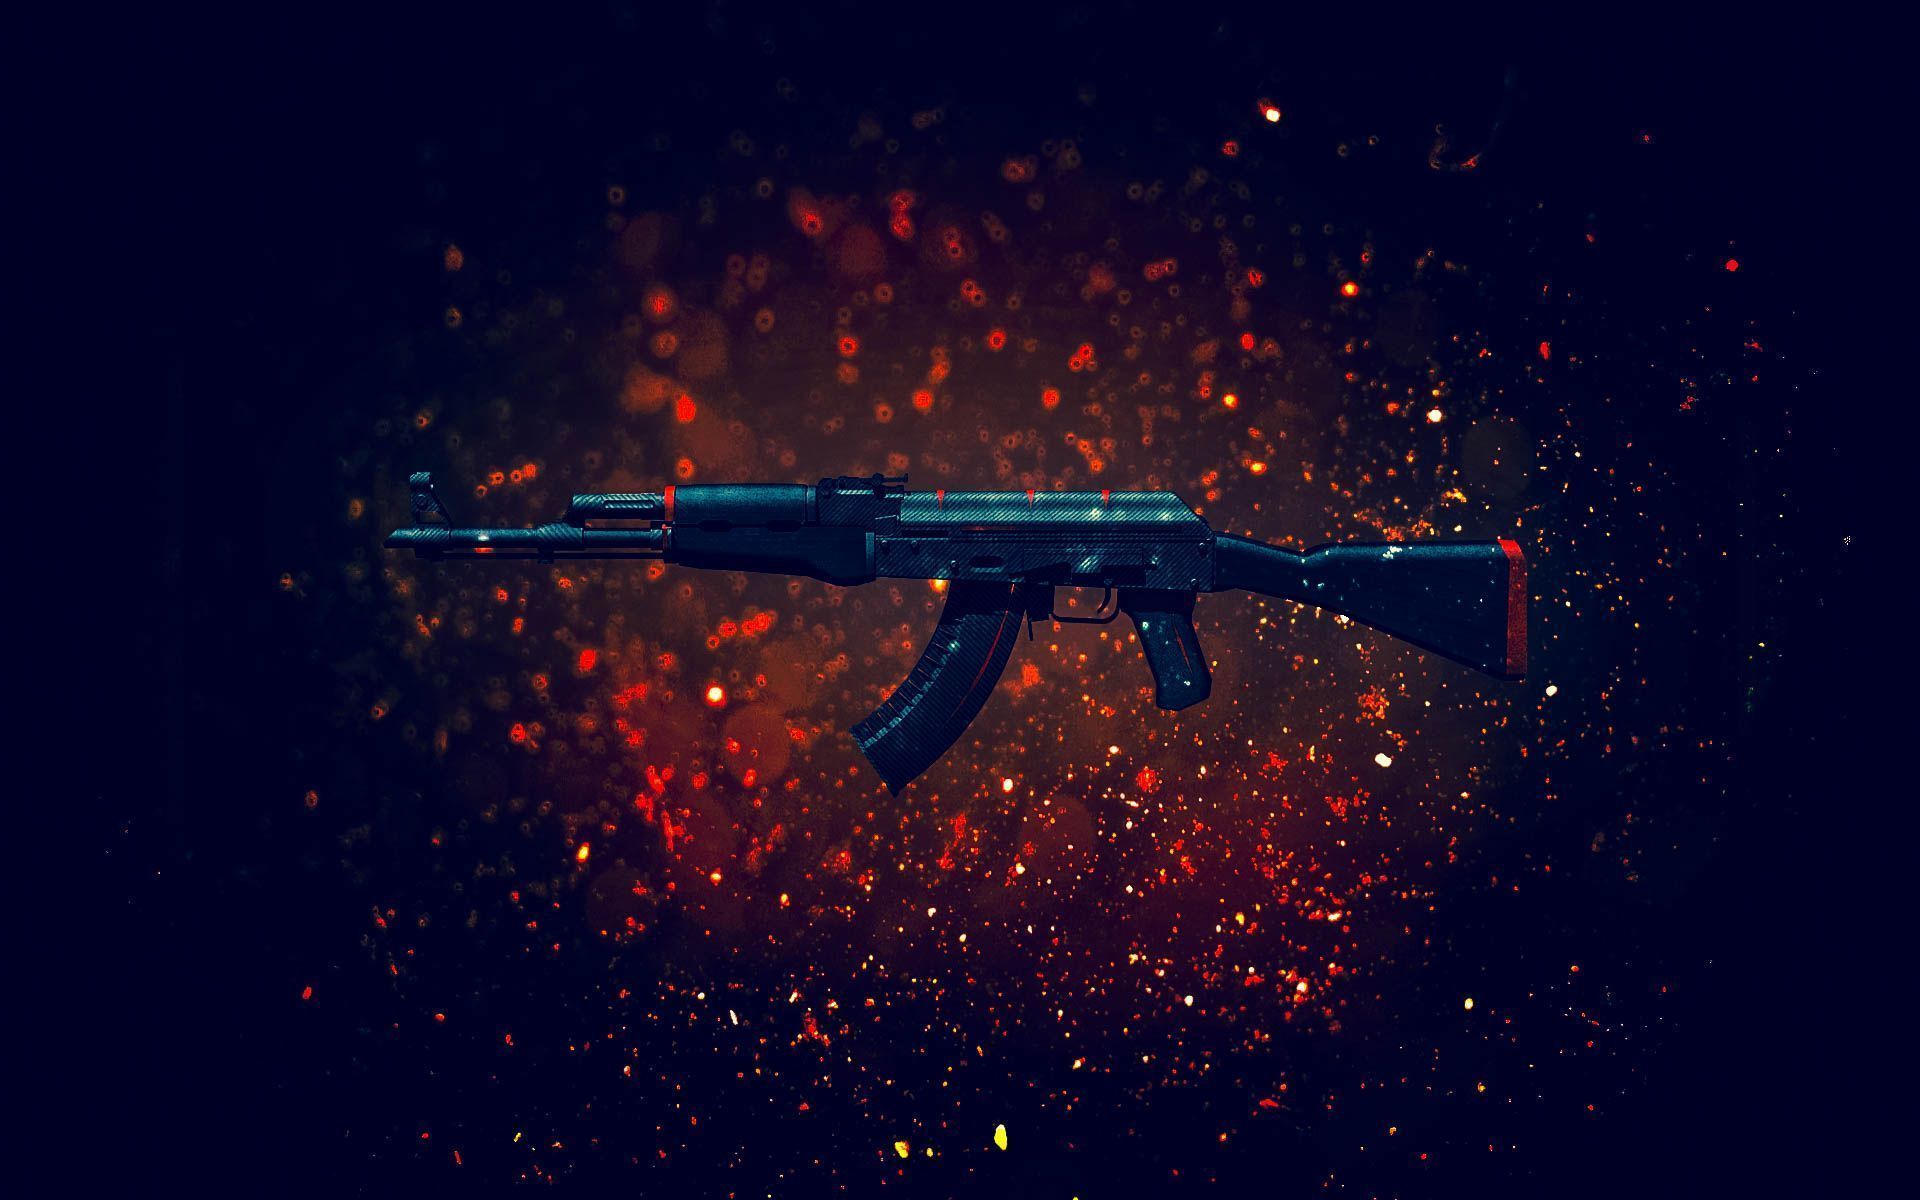 Download wallpaper the volcano, AK-47, Counter-Strike: Global Offensive, CS: GO, Vulcan, section games in resolution 1366x768